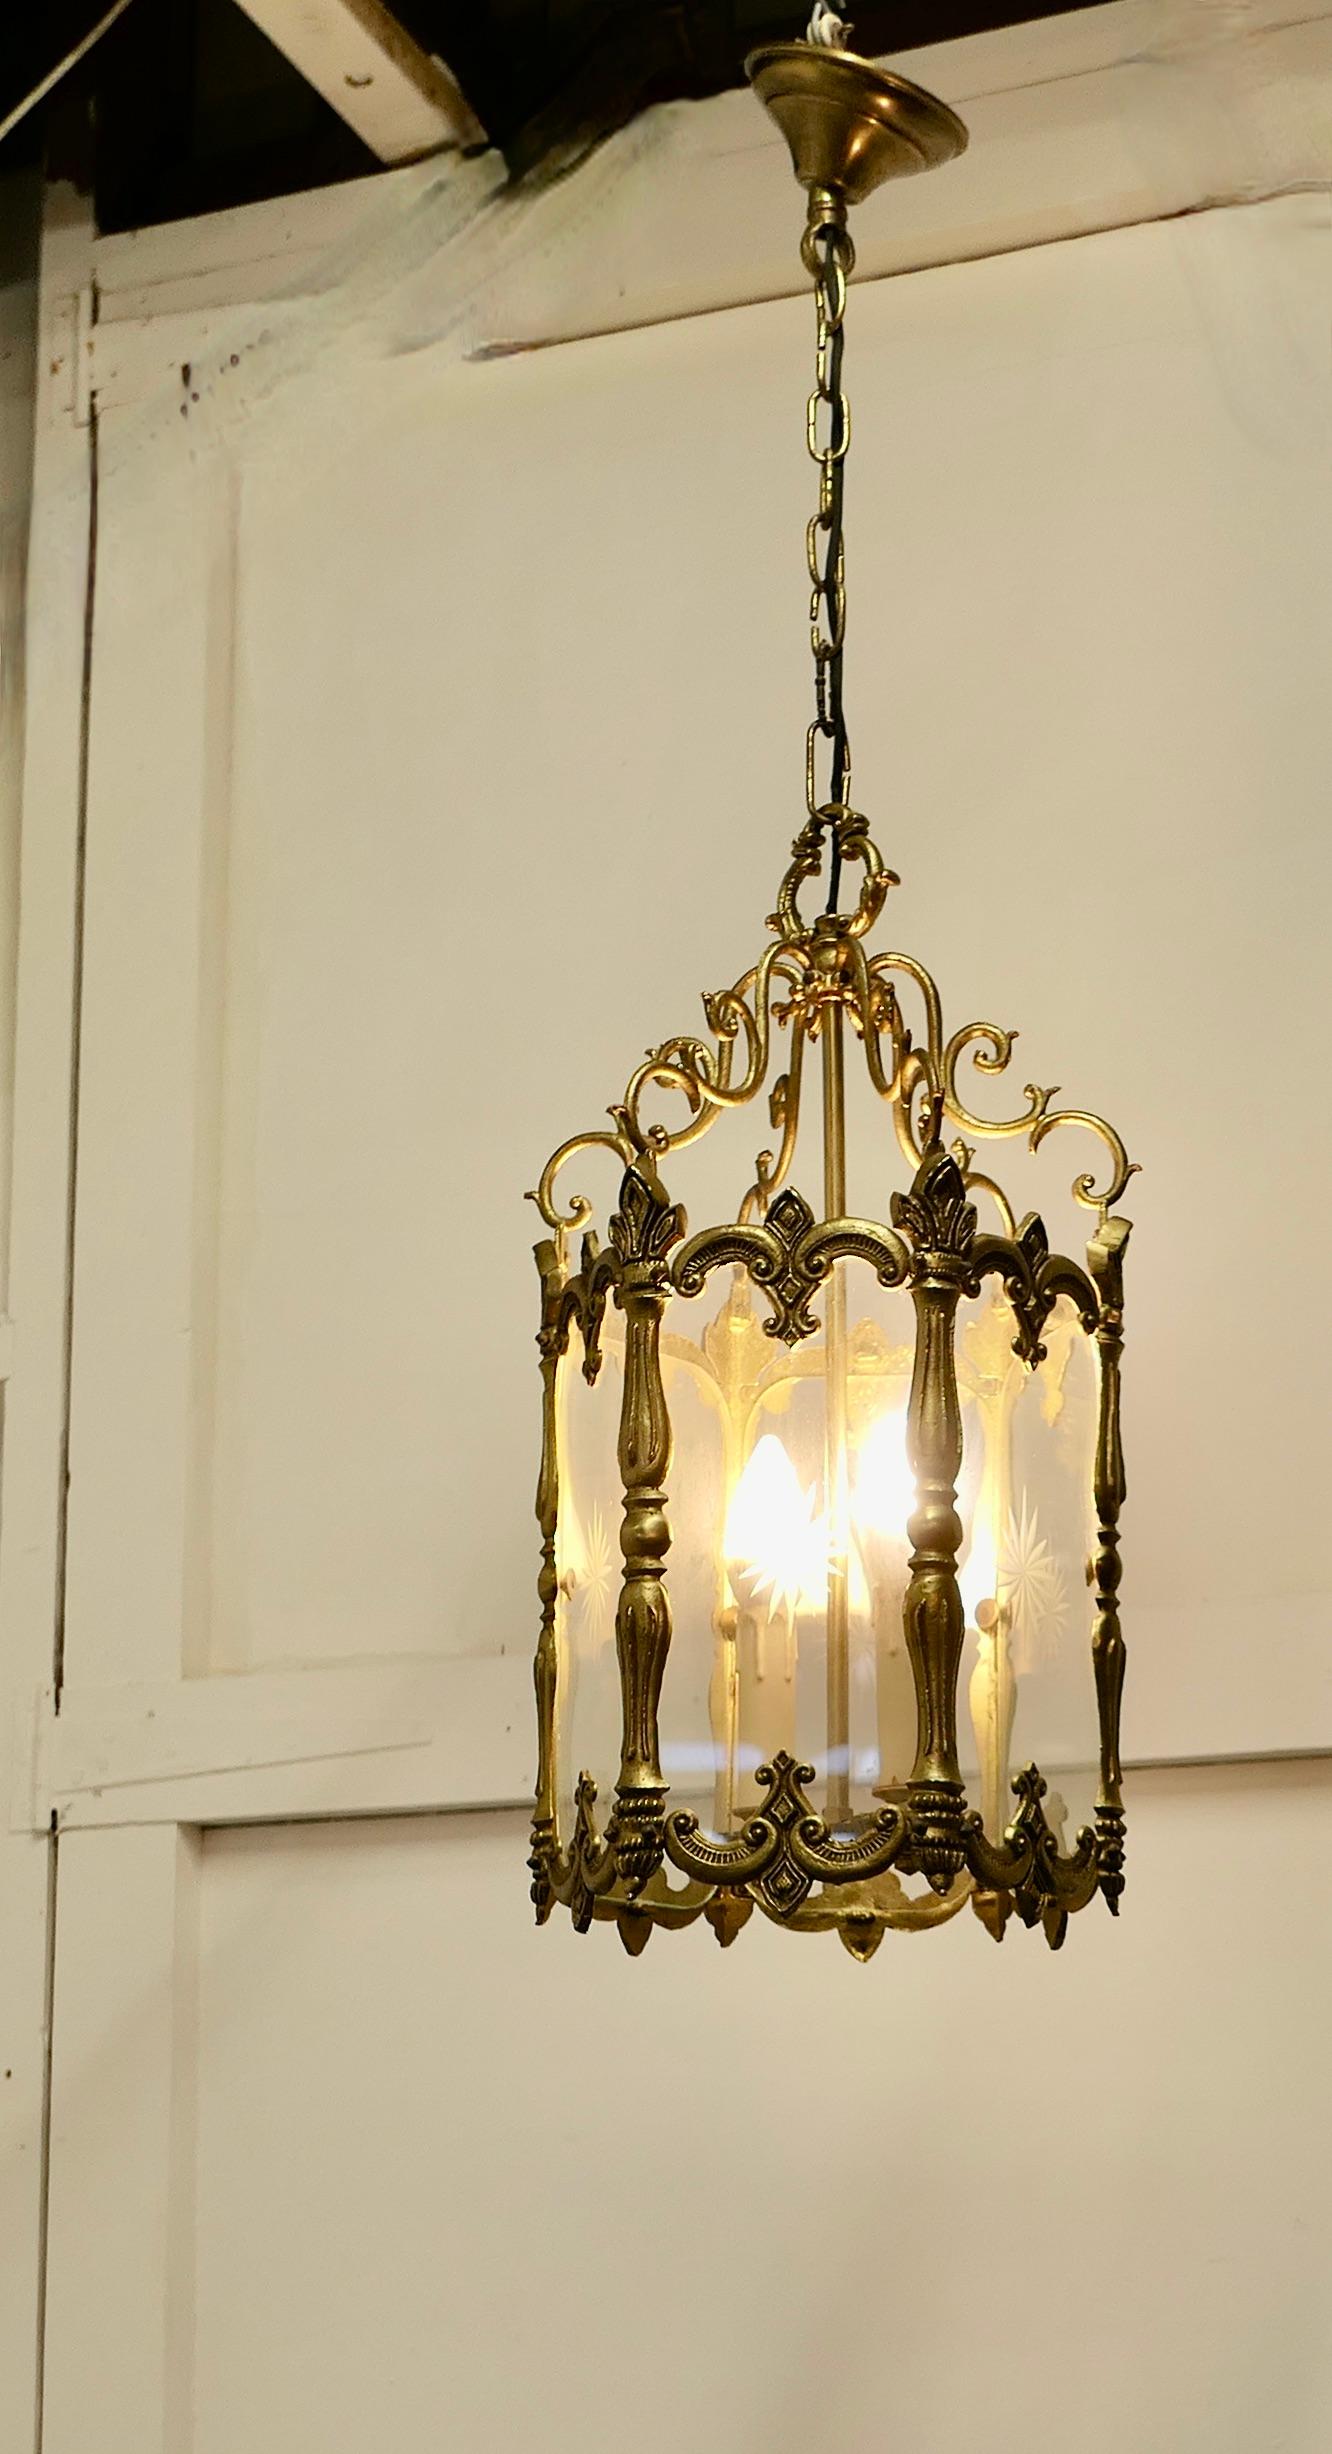 Large French Rococo brass glass lantern hall light

A superb quality heavy brass lantern, the lantern has 6 glass sides each etched with a starburst at the centre, the decorative brass is in the French style with leaves and it hangs on a chain